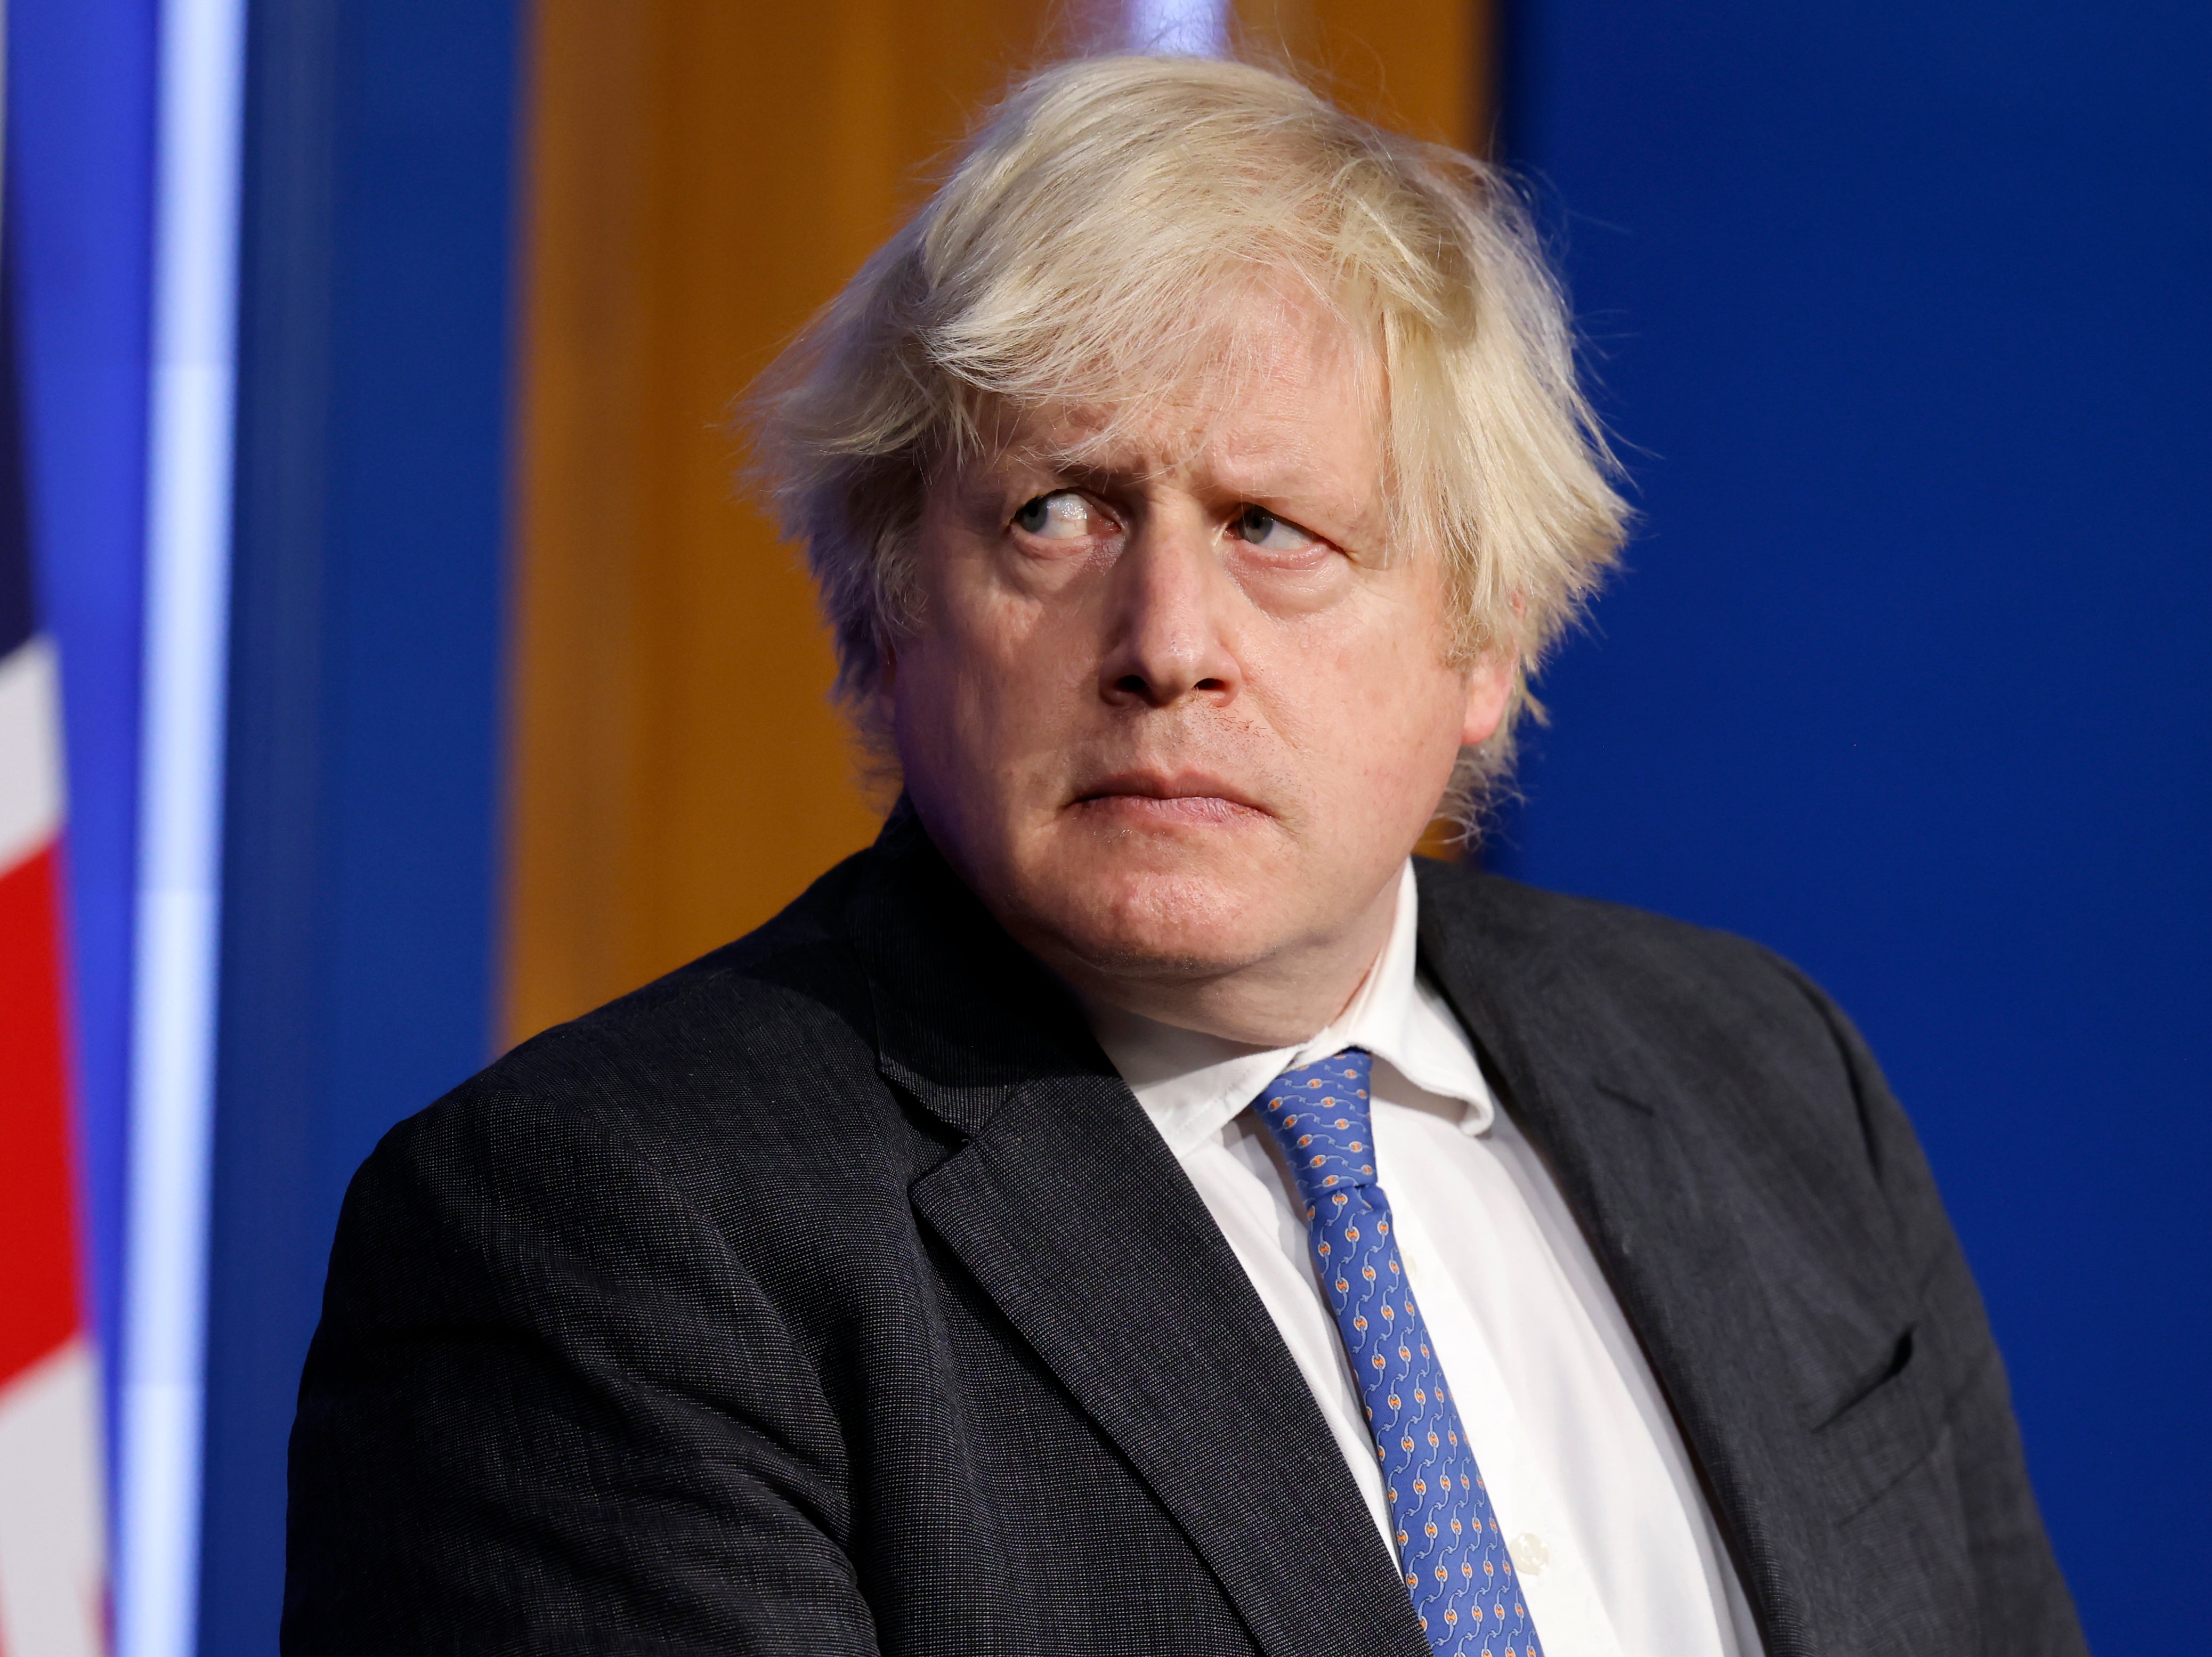 Prime Minister Boris Johnson’s motivations are being questioned